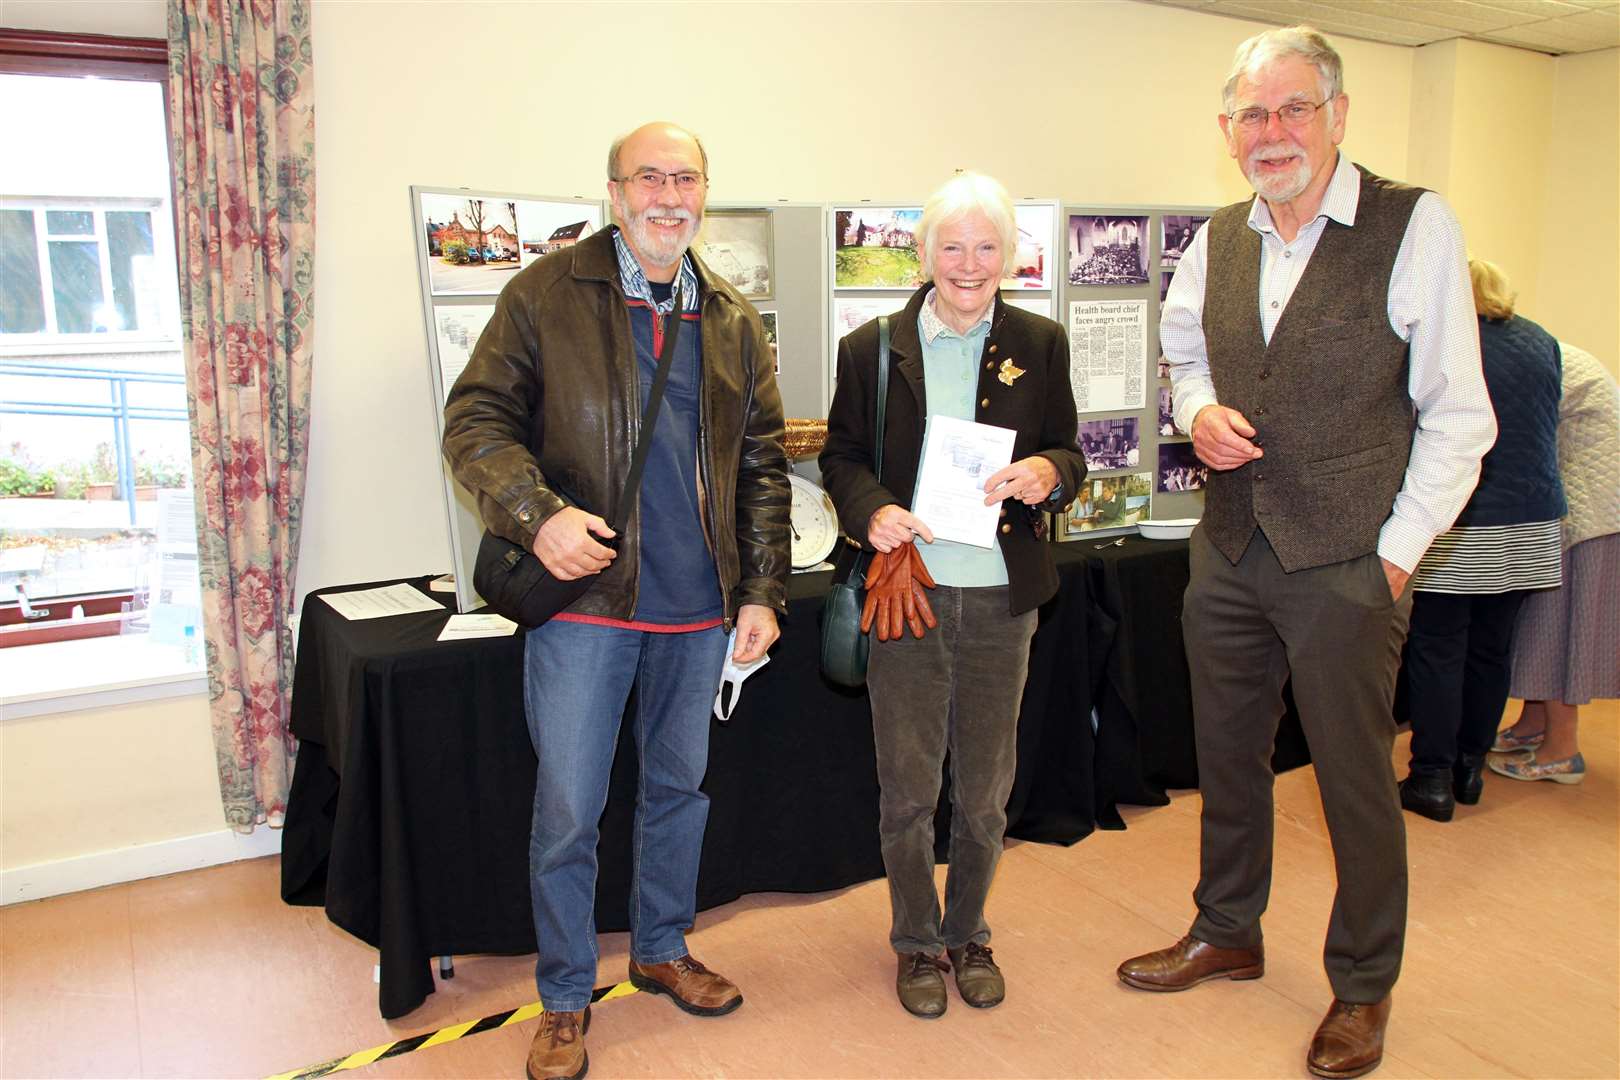 READ ALL ABOUT IT: Jim Leslie (left) is writing a book about the grand old hospital in the Strathspey capital. Jane Yeadon, a former nurse, already has written books on her professional days. They were welcomed to the drop-in sessions by Grantown Society's Bill Sadler.